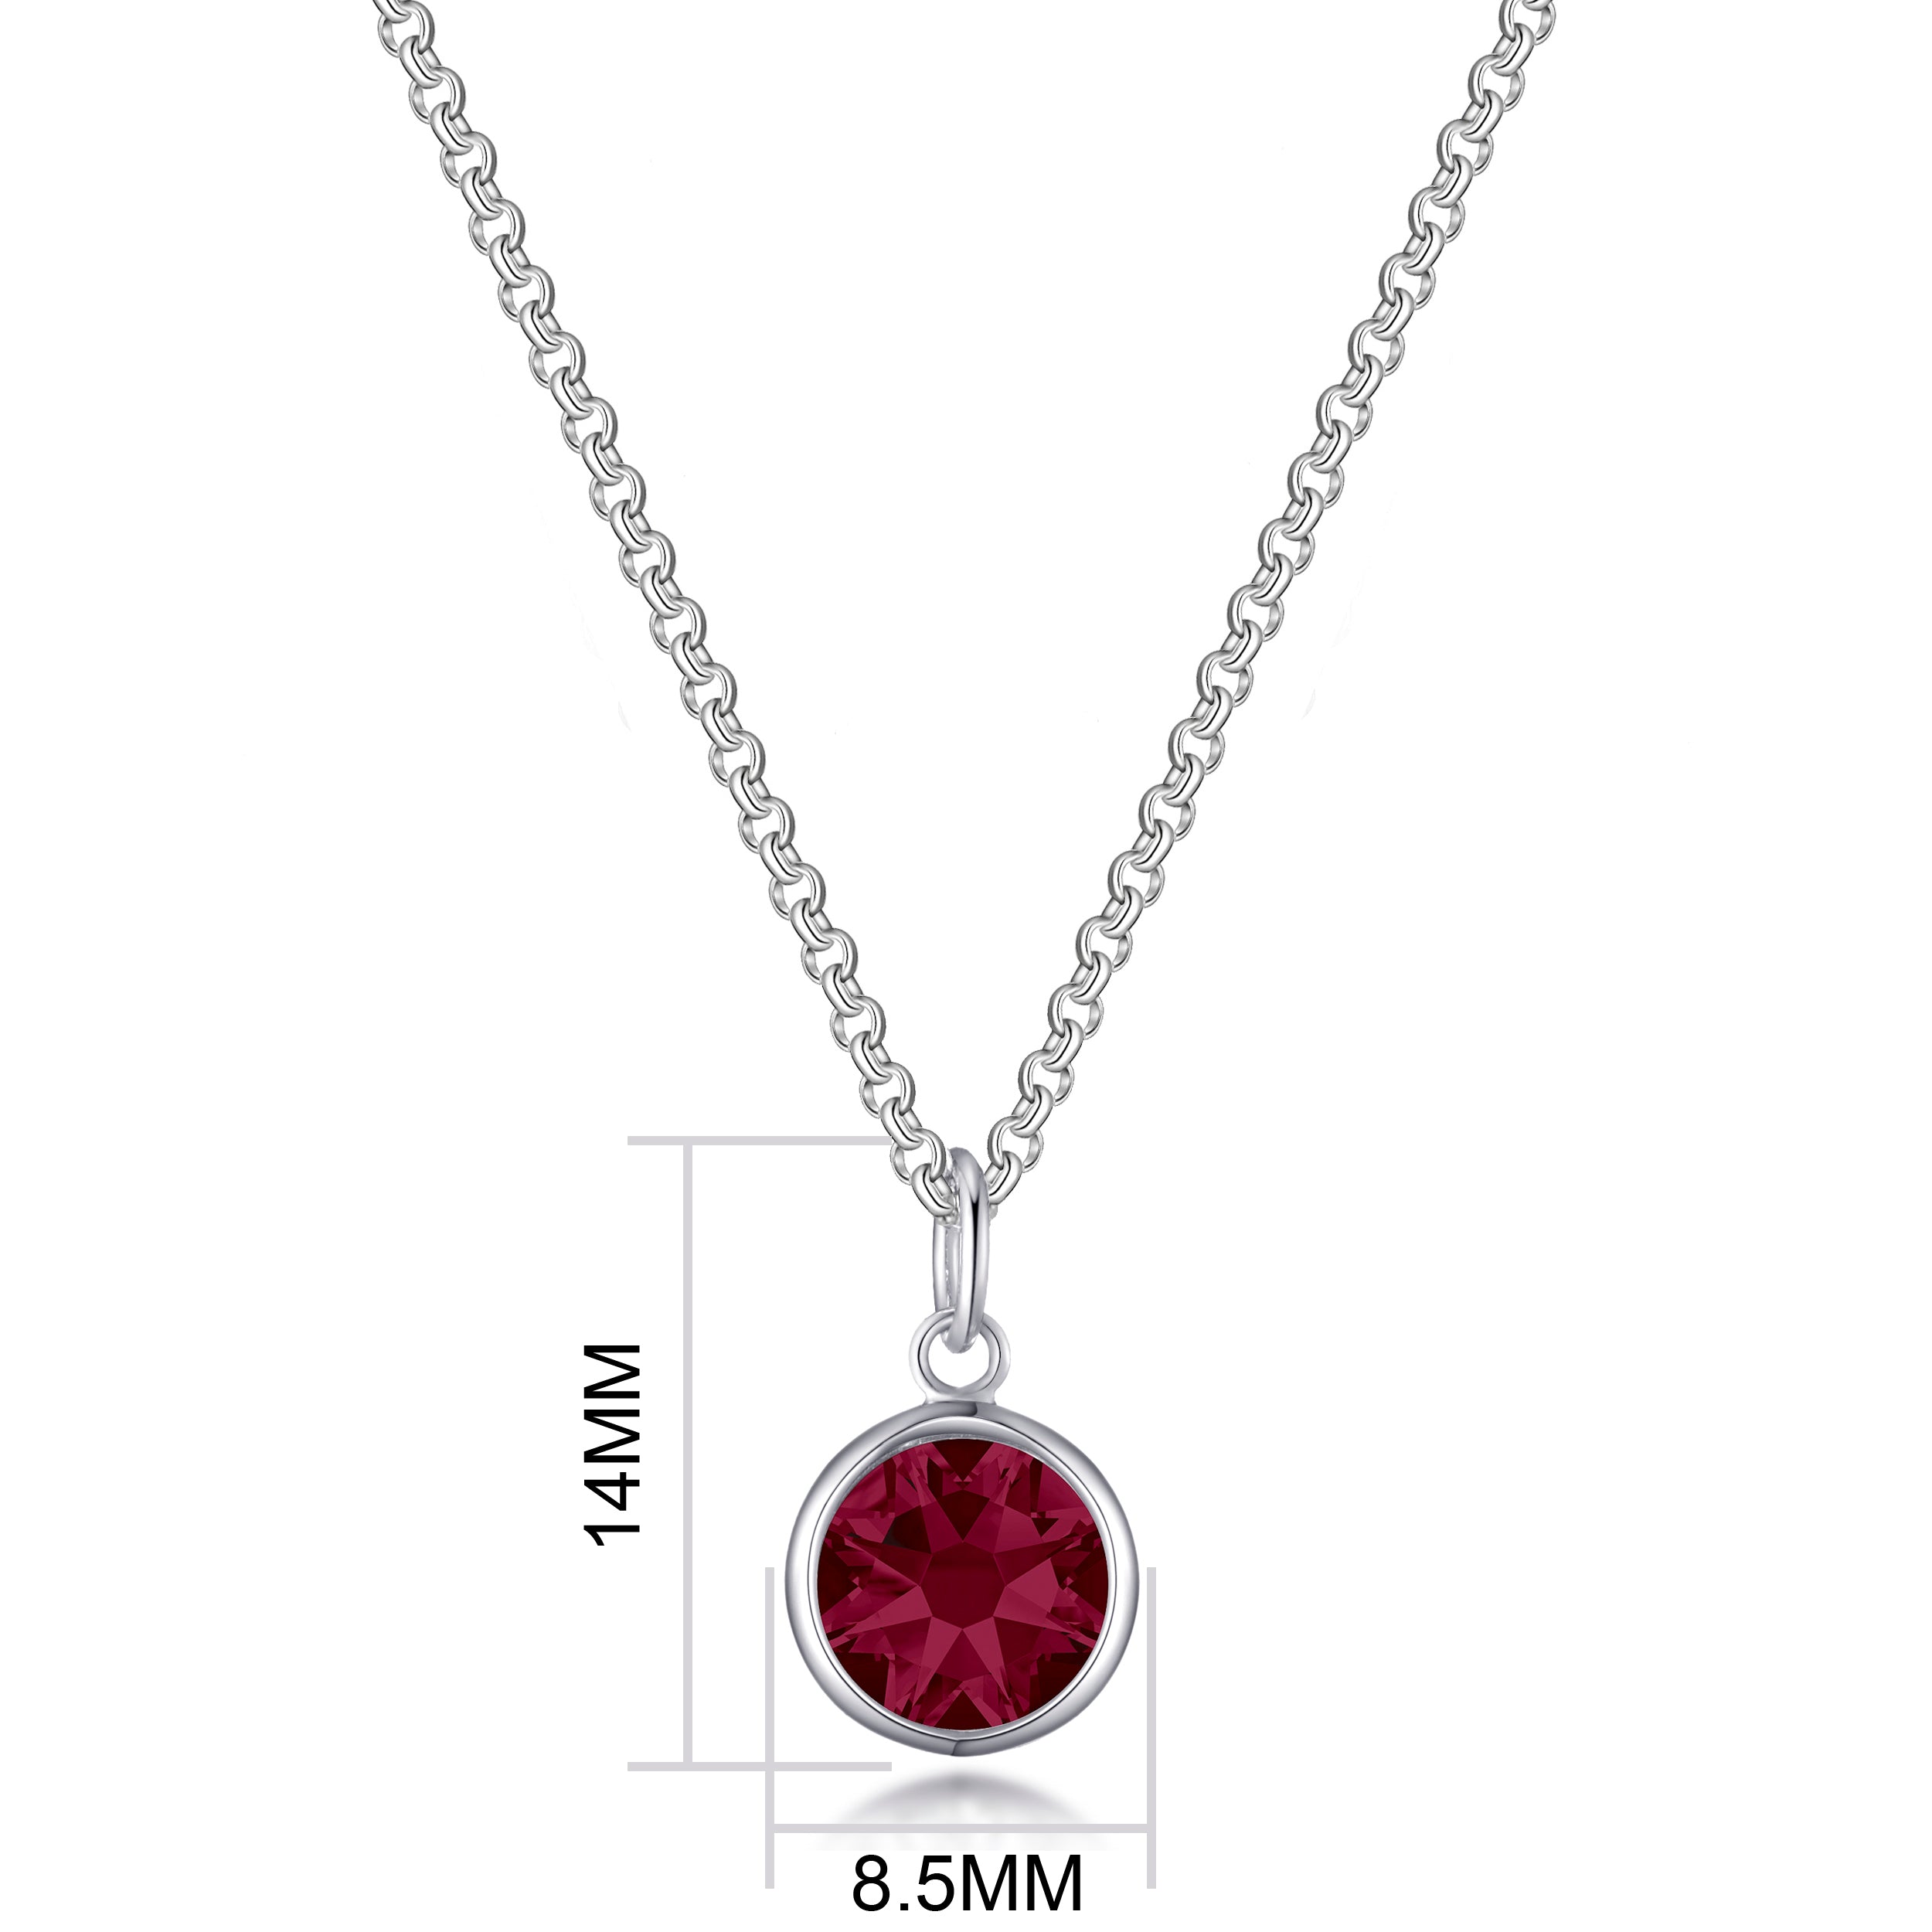 July Initial Birthstone Necklace Created with Zircondia® Crystals